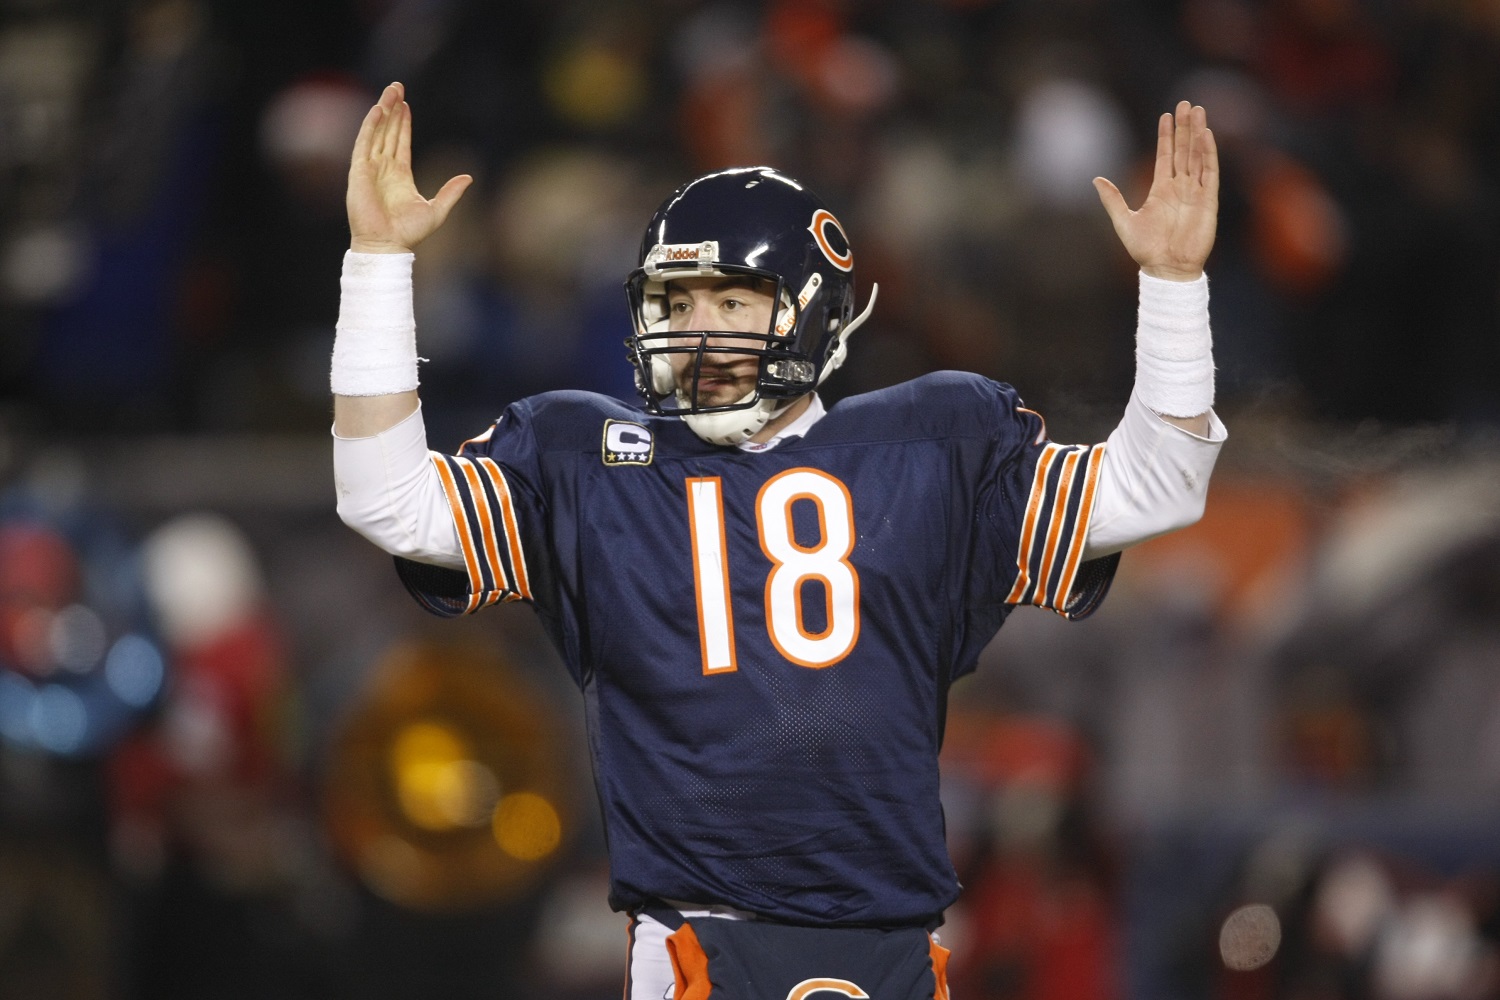 Chicago Bears quarterback Kyle Orton during their NFL football game at Soldier Field in Chicago Monday, Dec. 22, 2008.  (AP Photo/Jim Prisching)